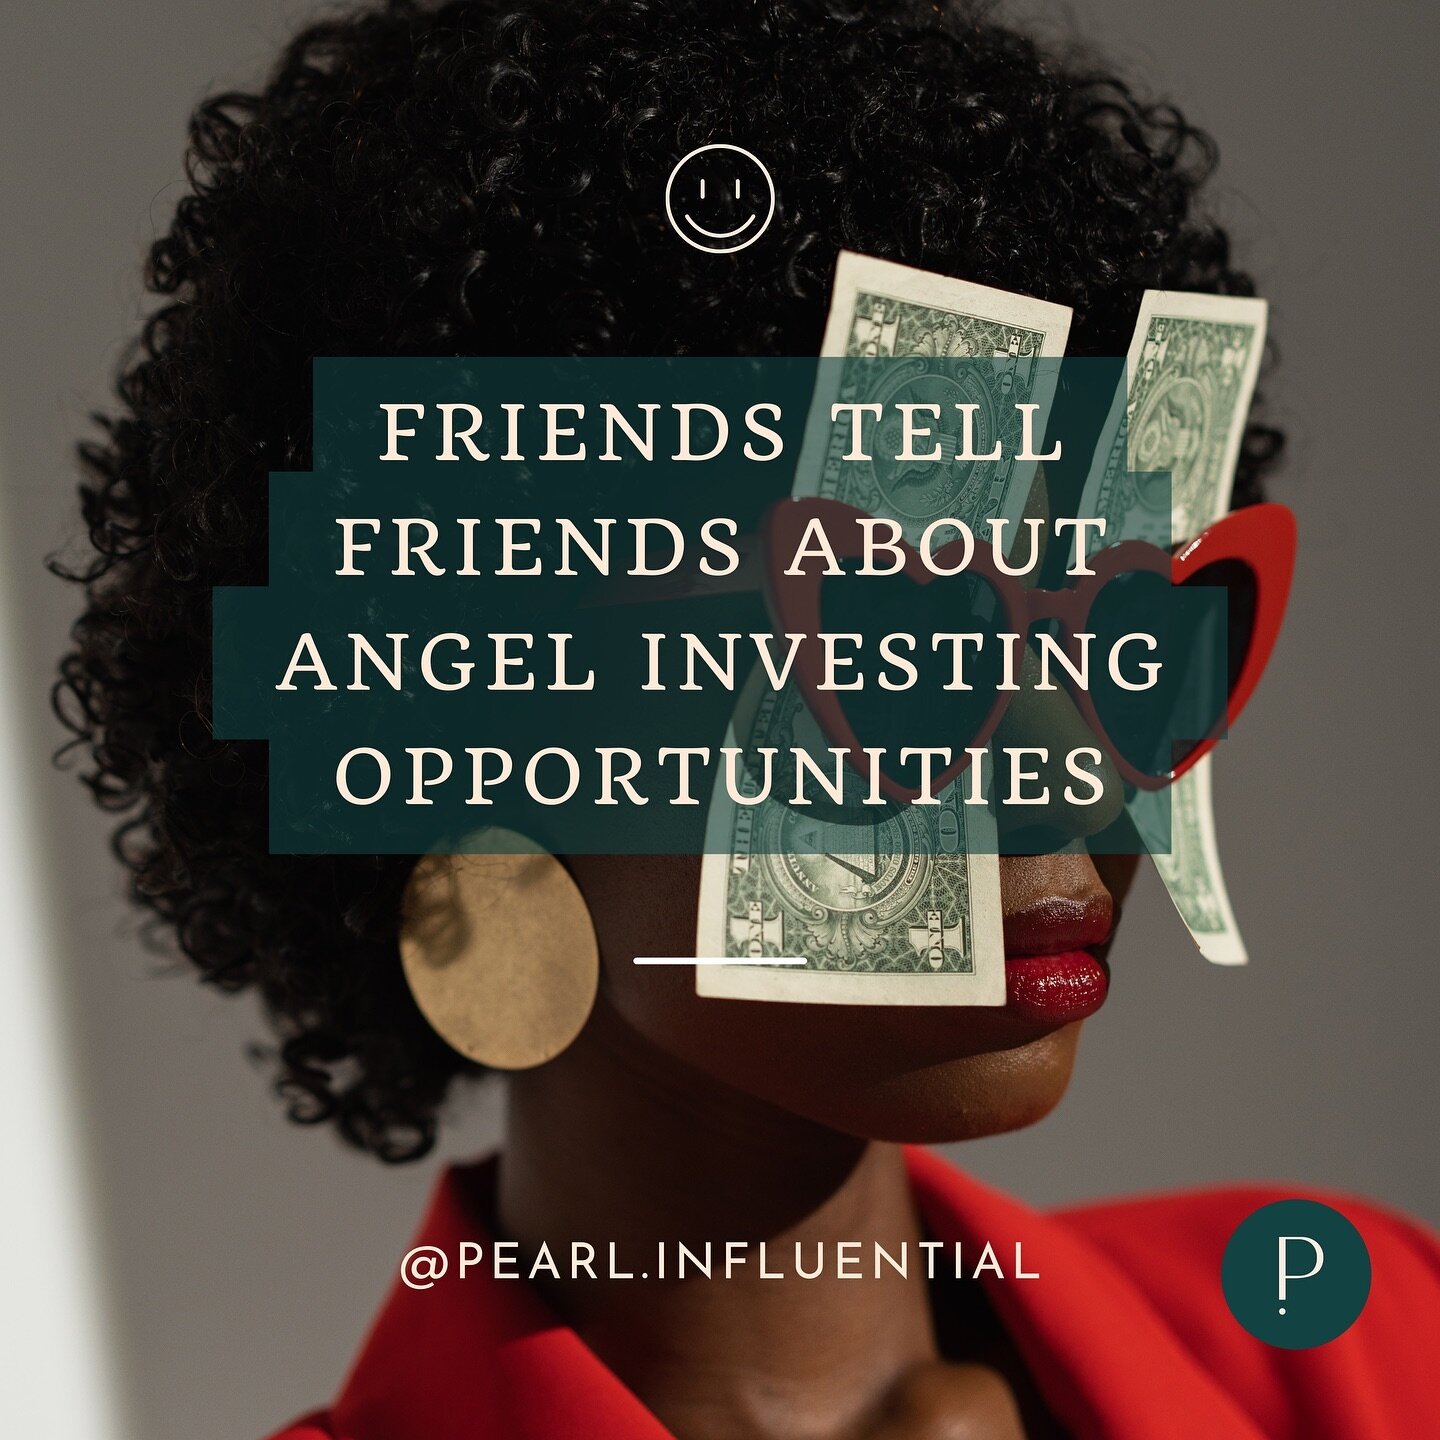 ✨TAG a friend (or two) who you think wants to learn more about #angelinvesting and let&rsquo;s grow together!

Here&rsquo;s to empowering one another in investing by bridging the gap through community, education, and shared opportunities.

Thank you 